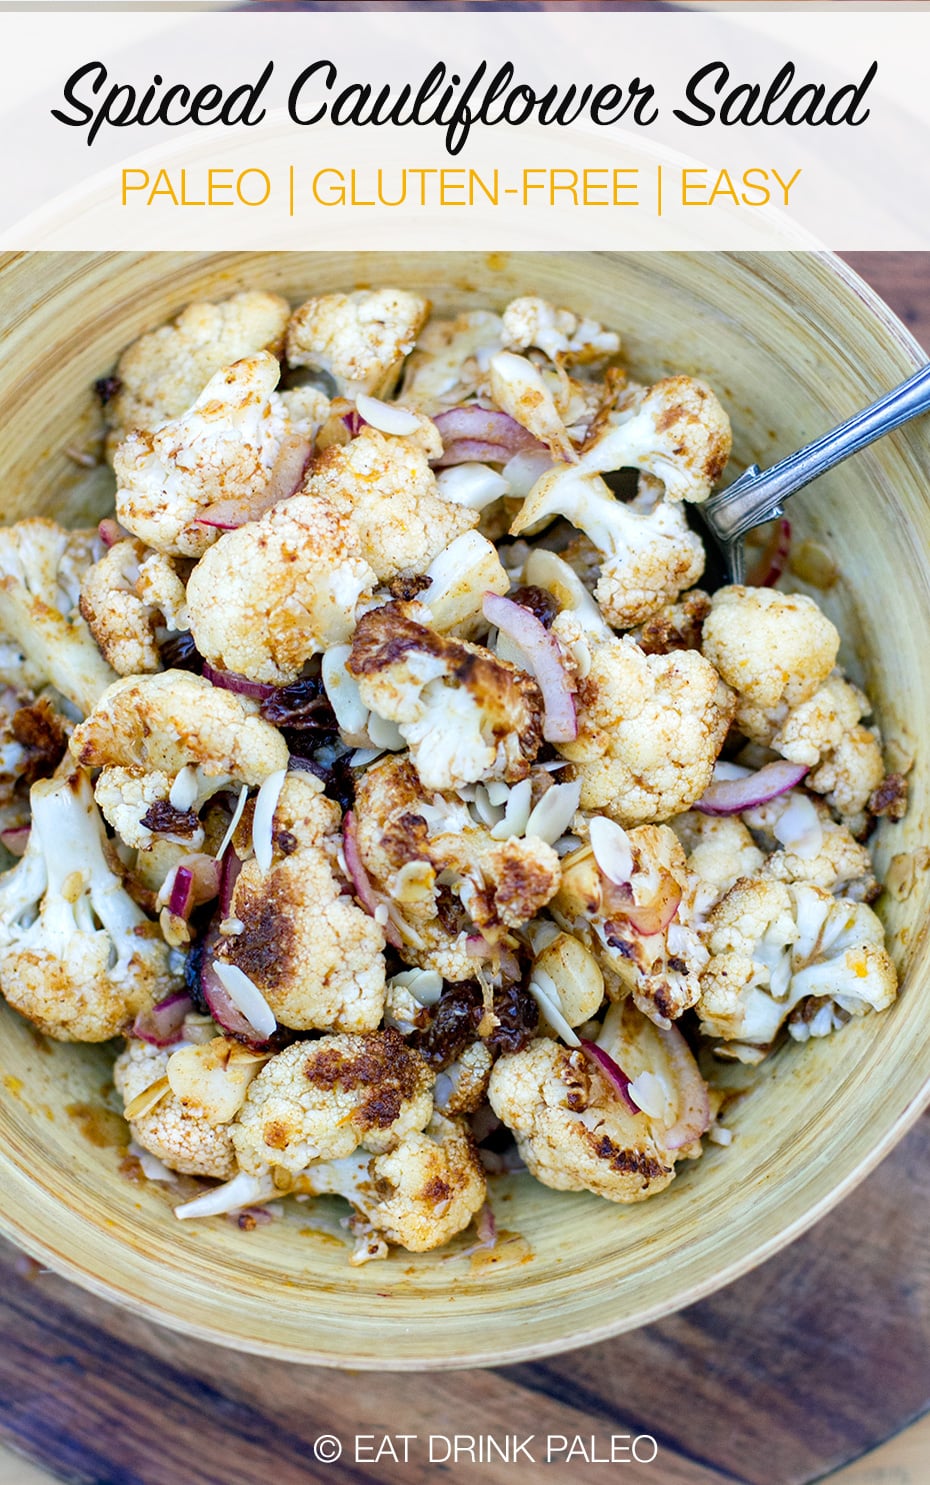 Moroccan-style spiced cauliflower salad with raisins and citrus dressing (paleo, gluten-free, healthy)